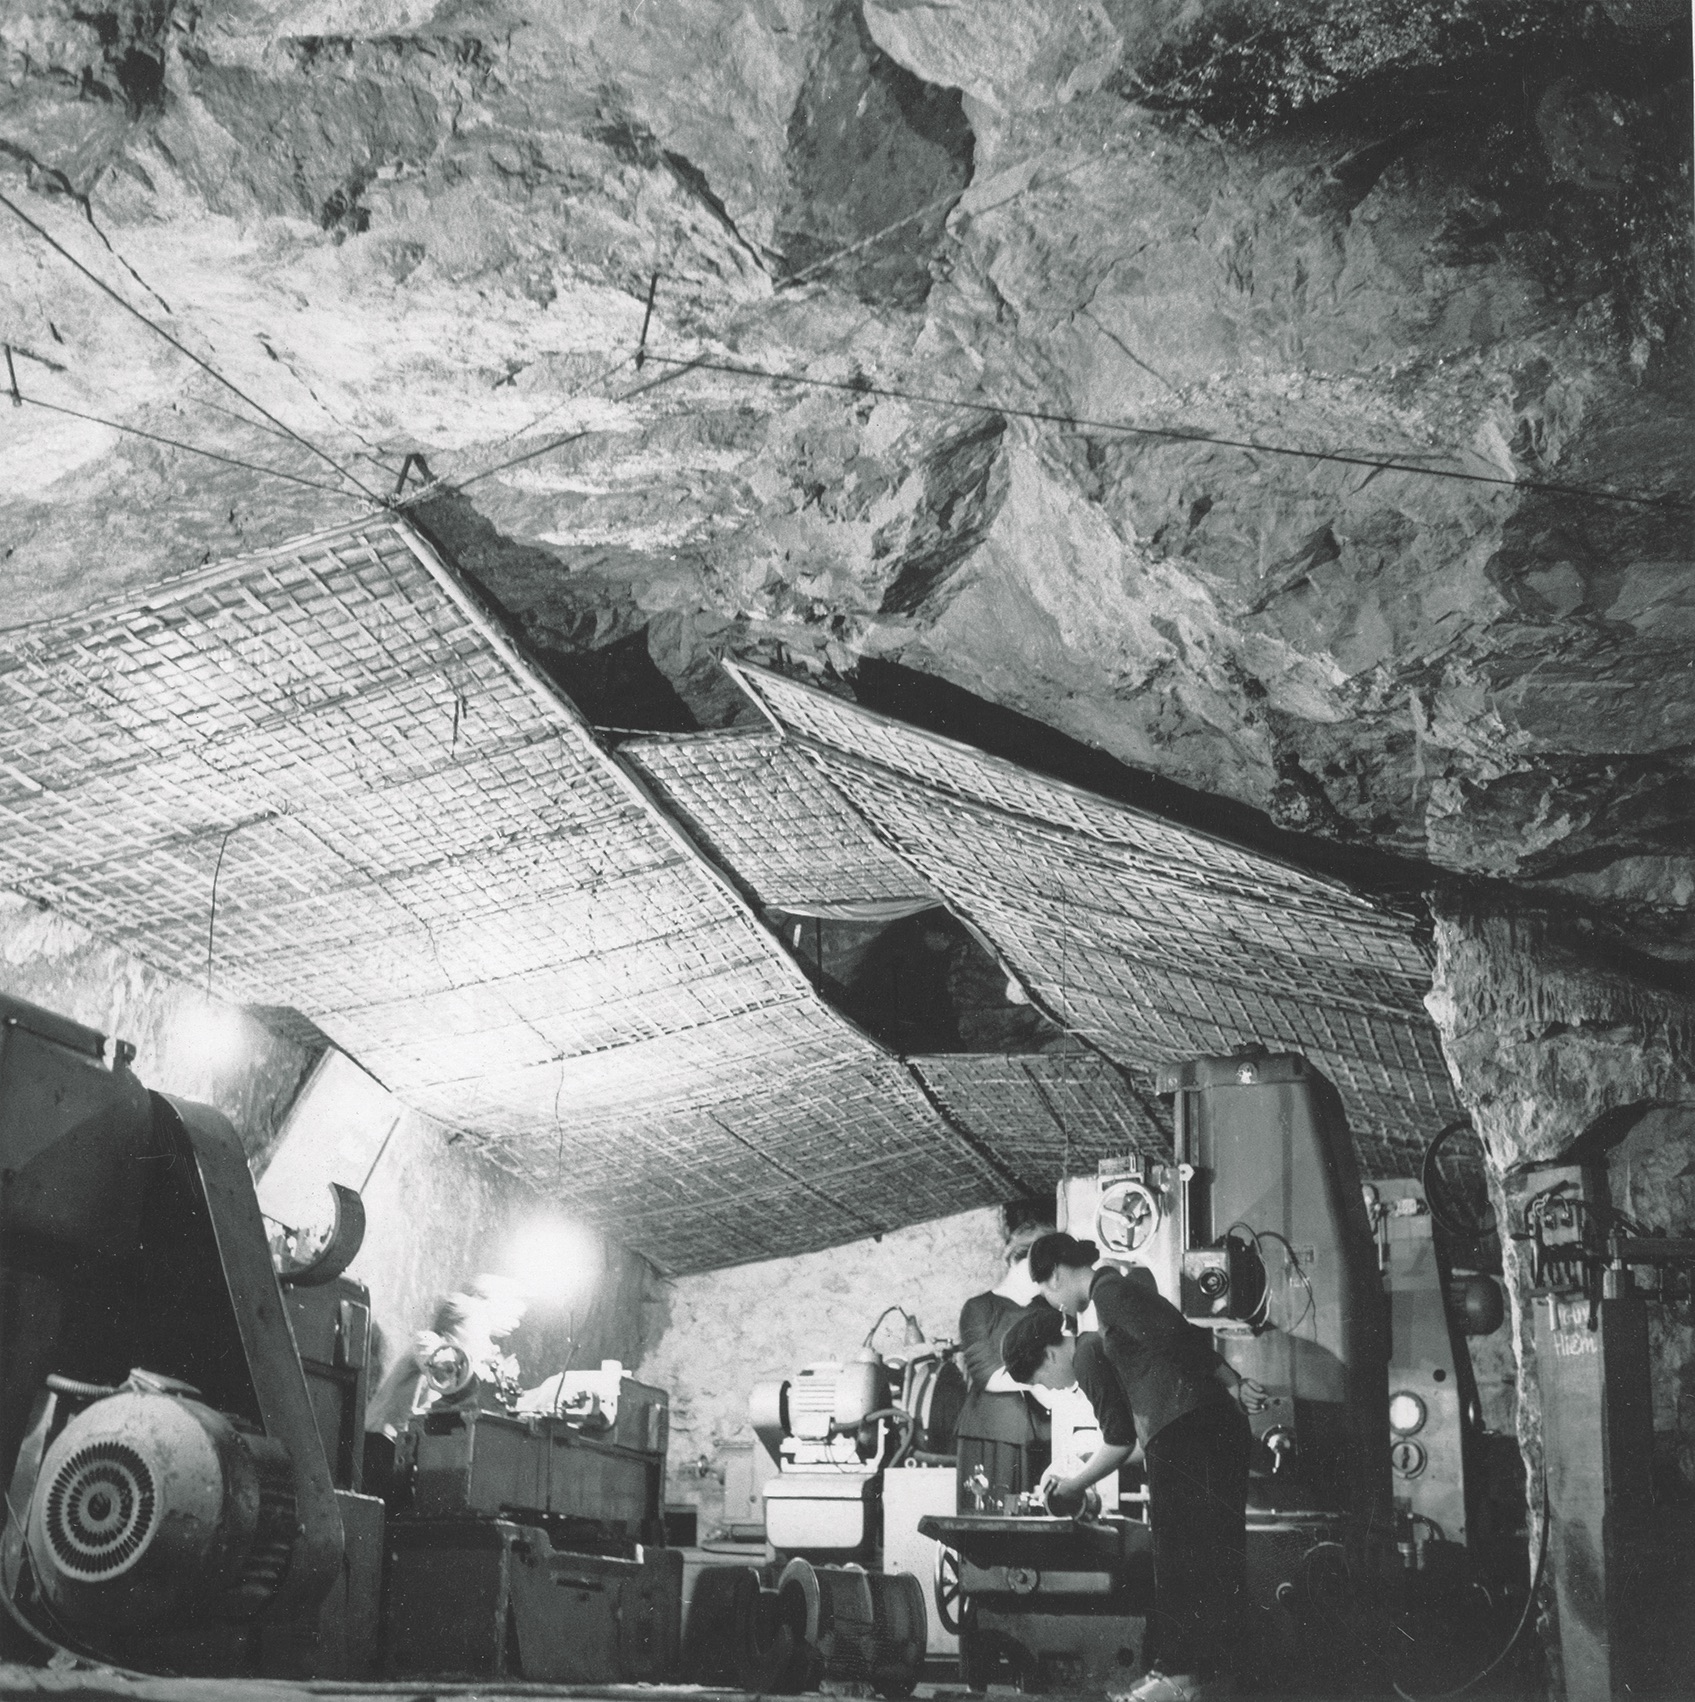 An auto repair shop in a cave near the Ho Chi Minh Trail supported the NVA’s efforts to keep its trail traffic secret. (Sovfoto/Universal Images Group via Getty Images)